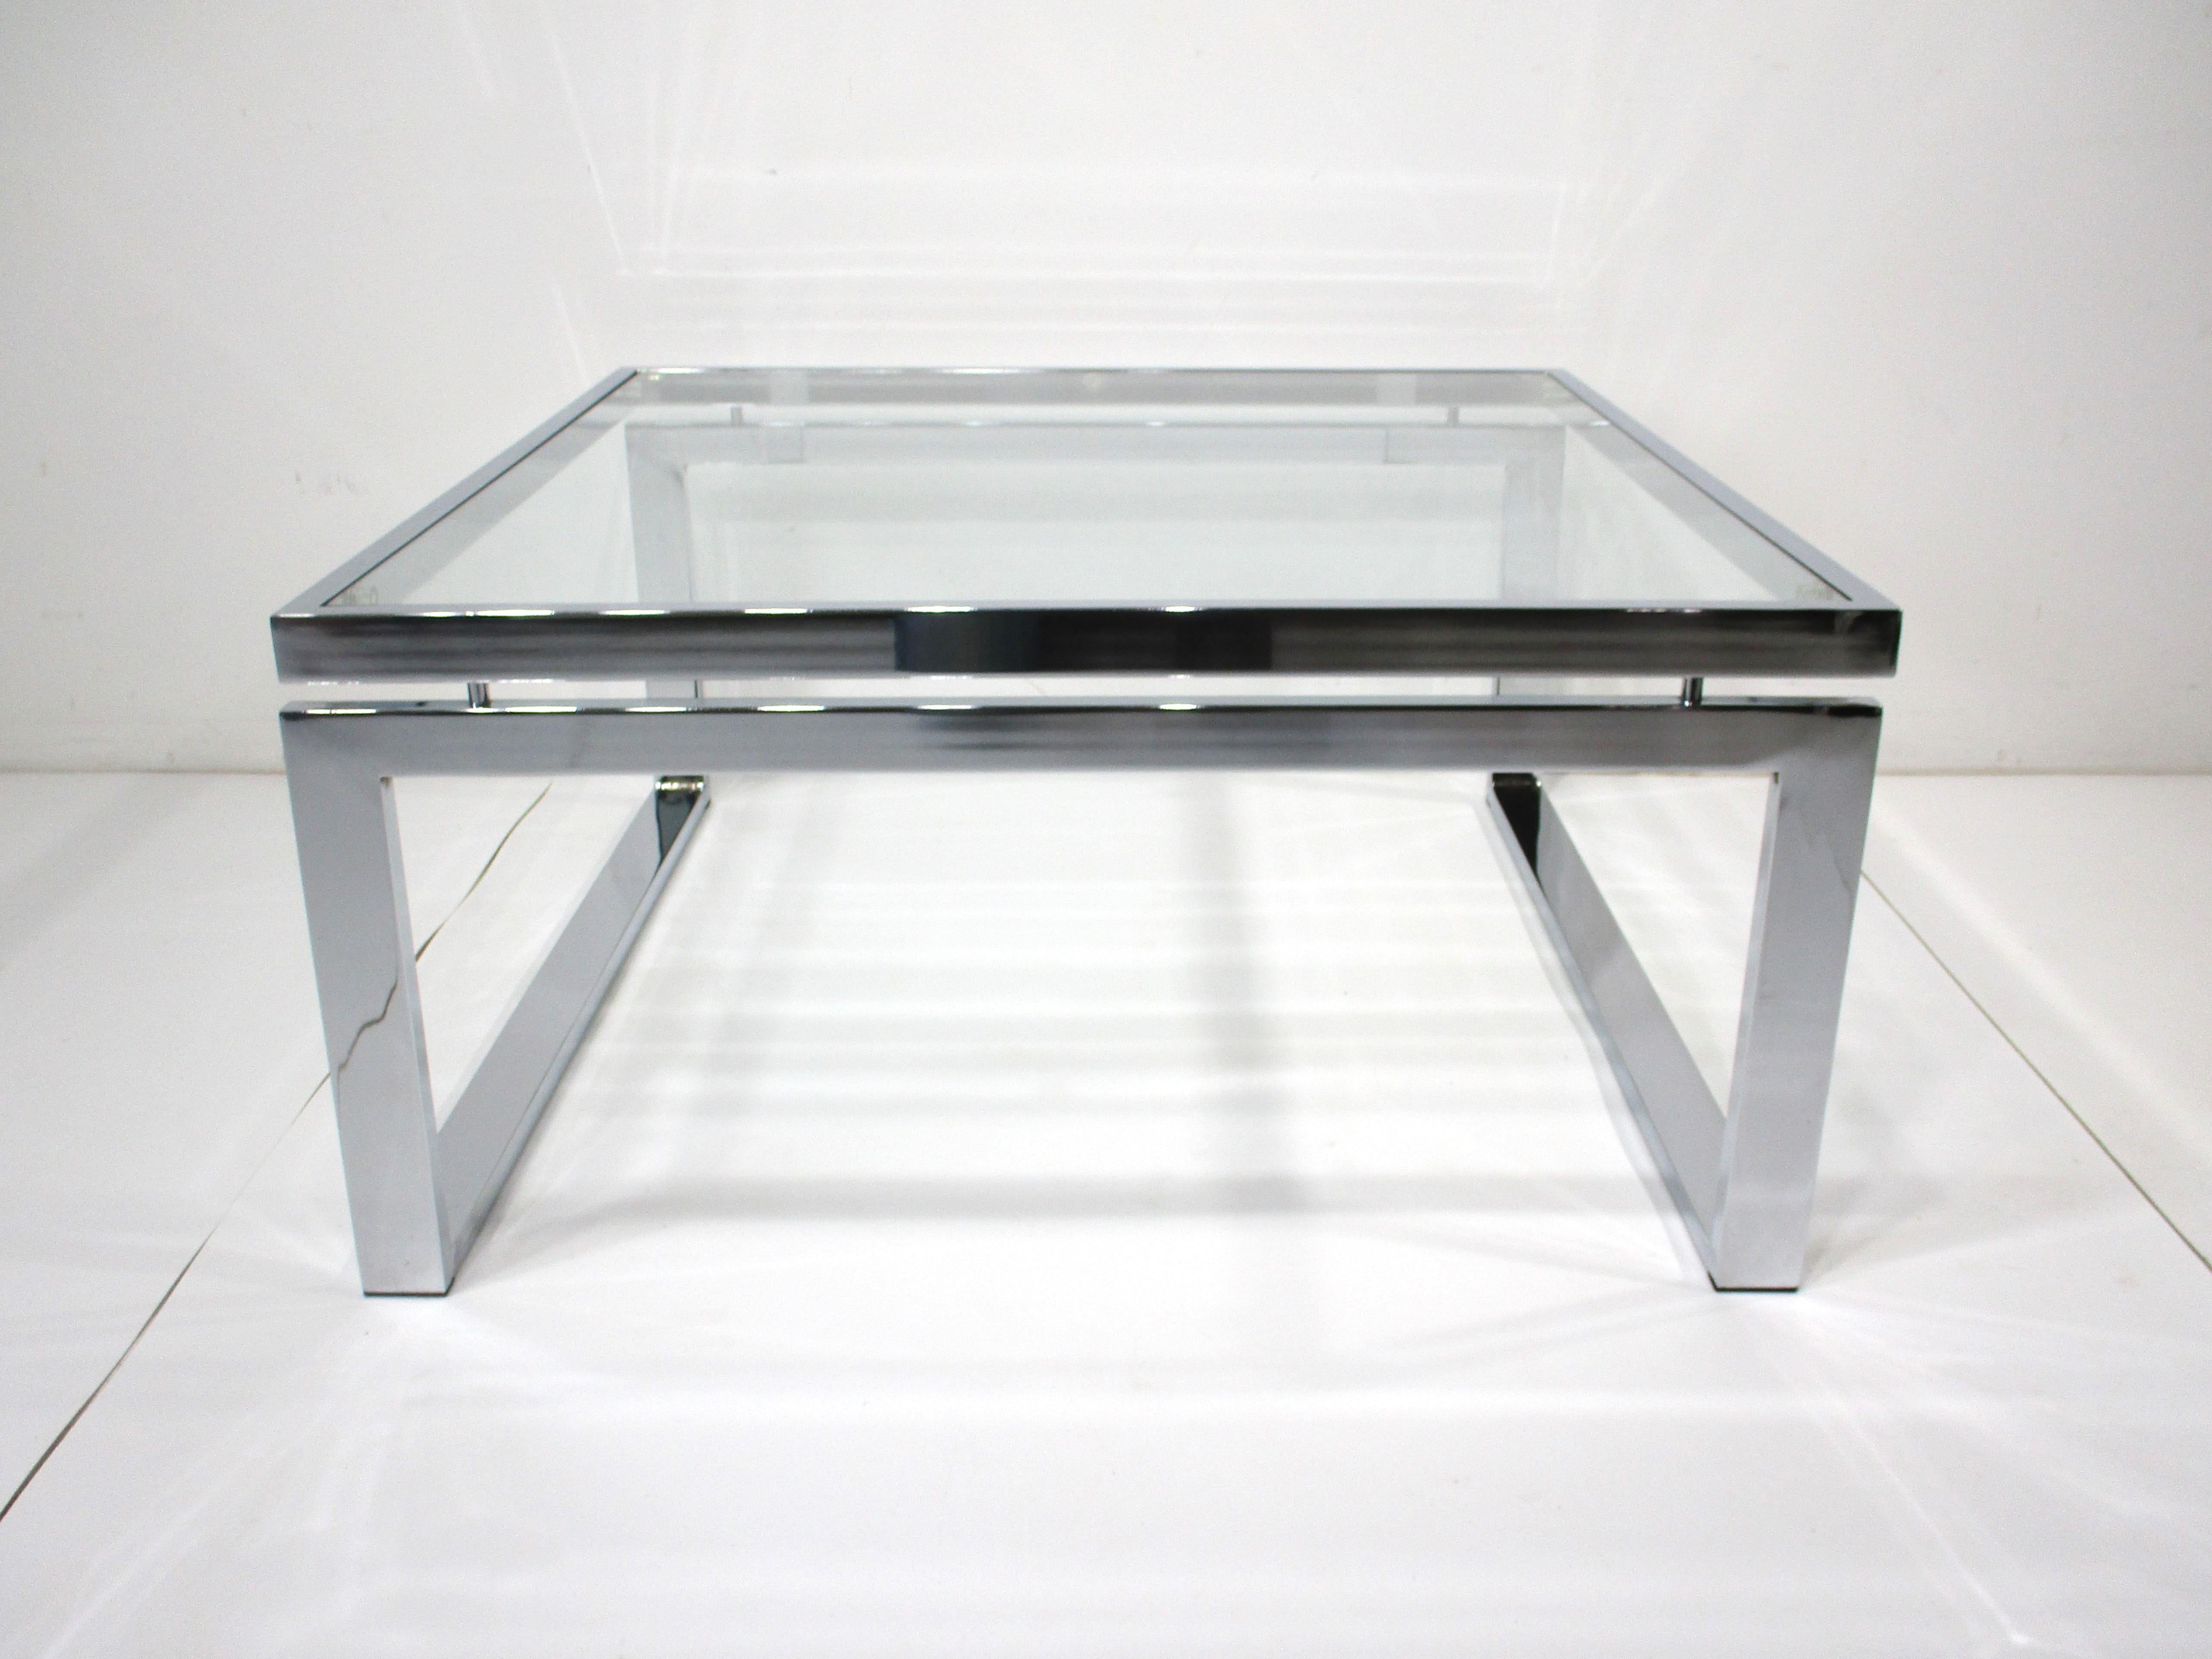 A chromed metal flat bar coffee table with floating top section having a glass top . A very clean sophisticated form in the perfect size for that living room , entertainment area or sitting room . Designed in the manner of Milo Baughman .  